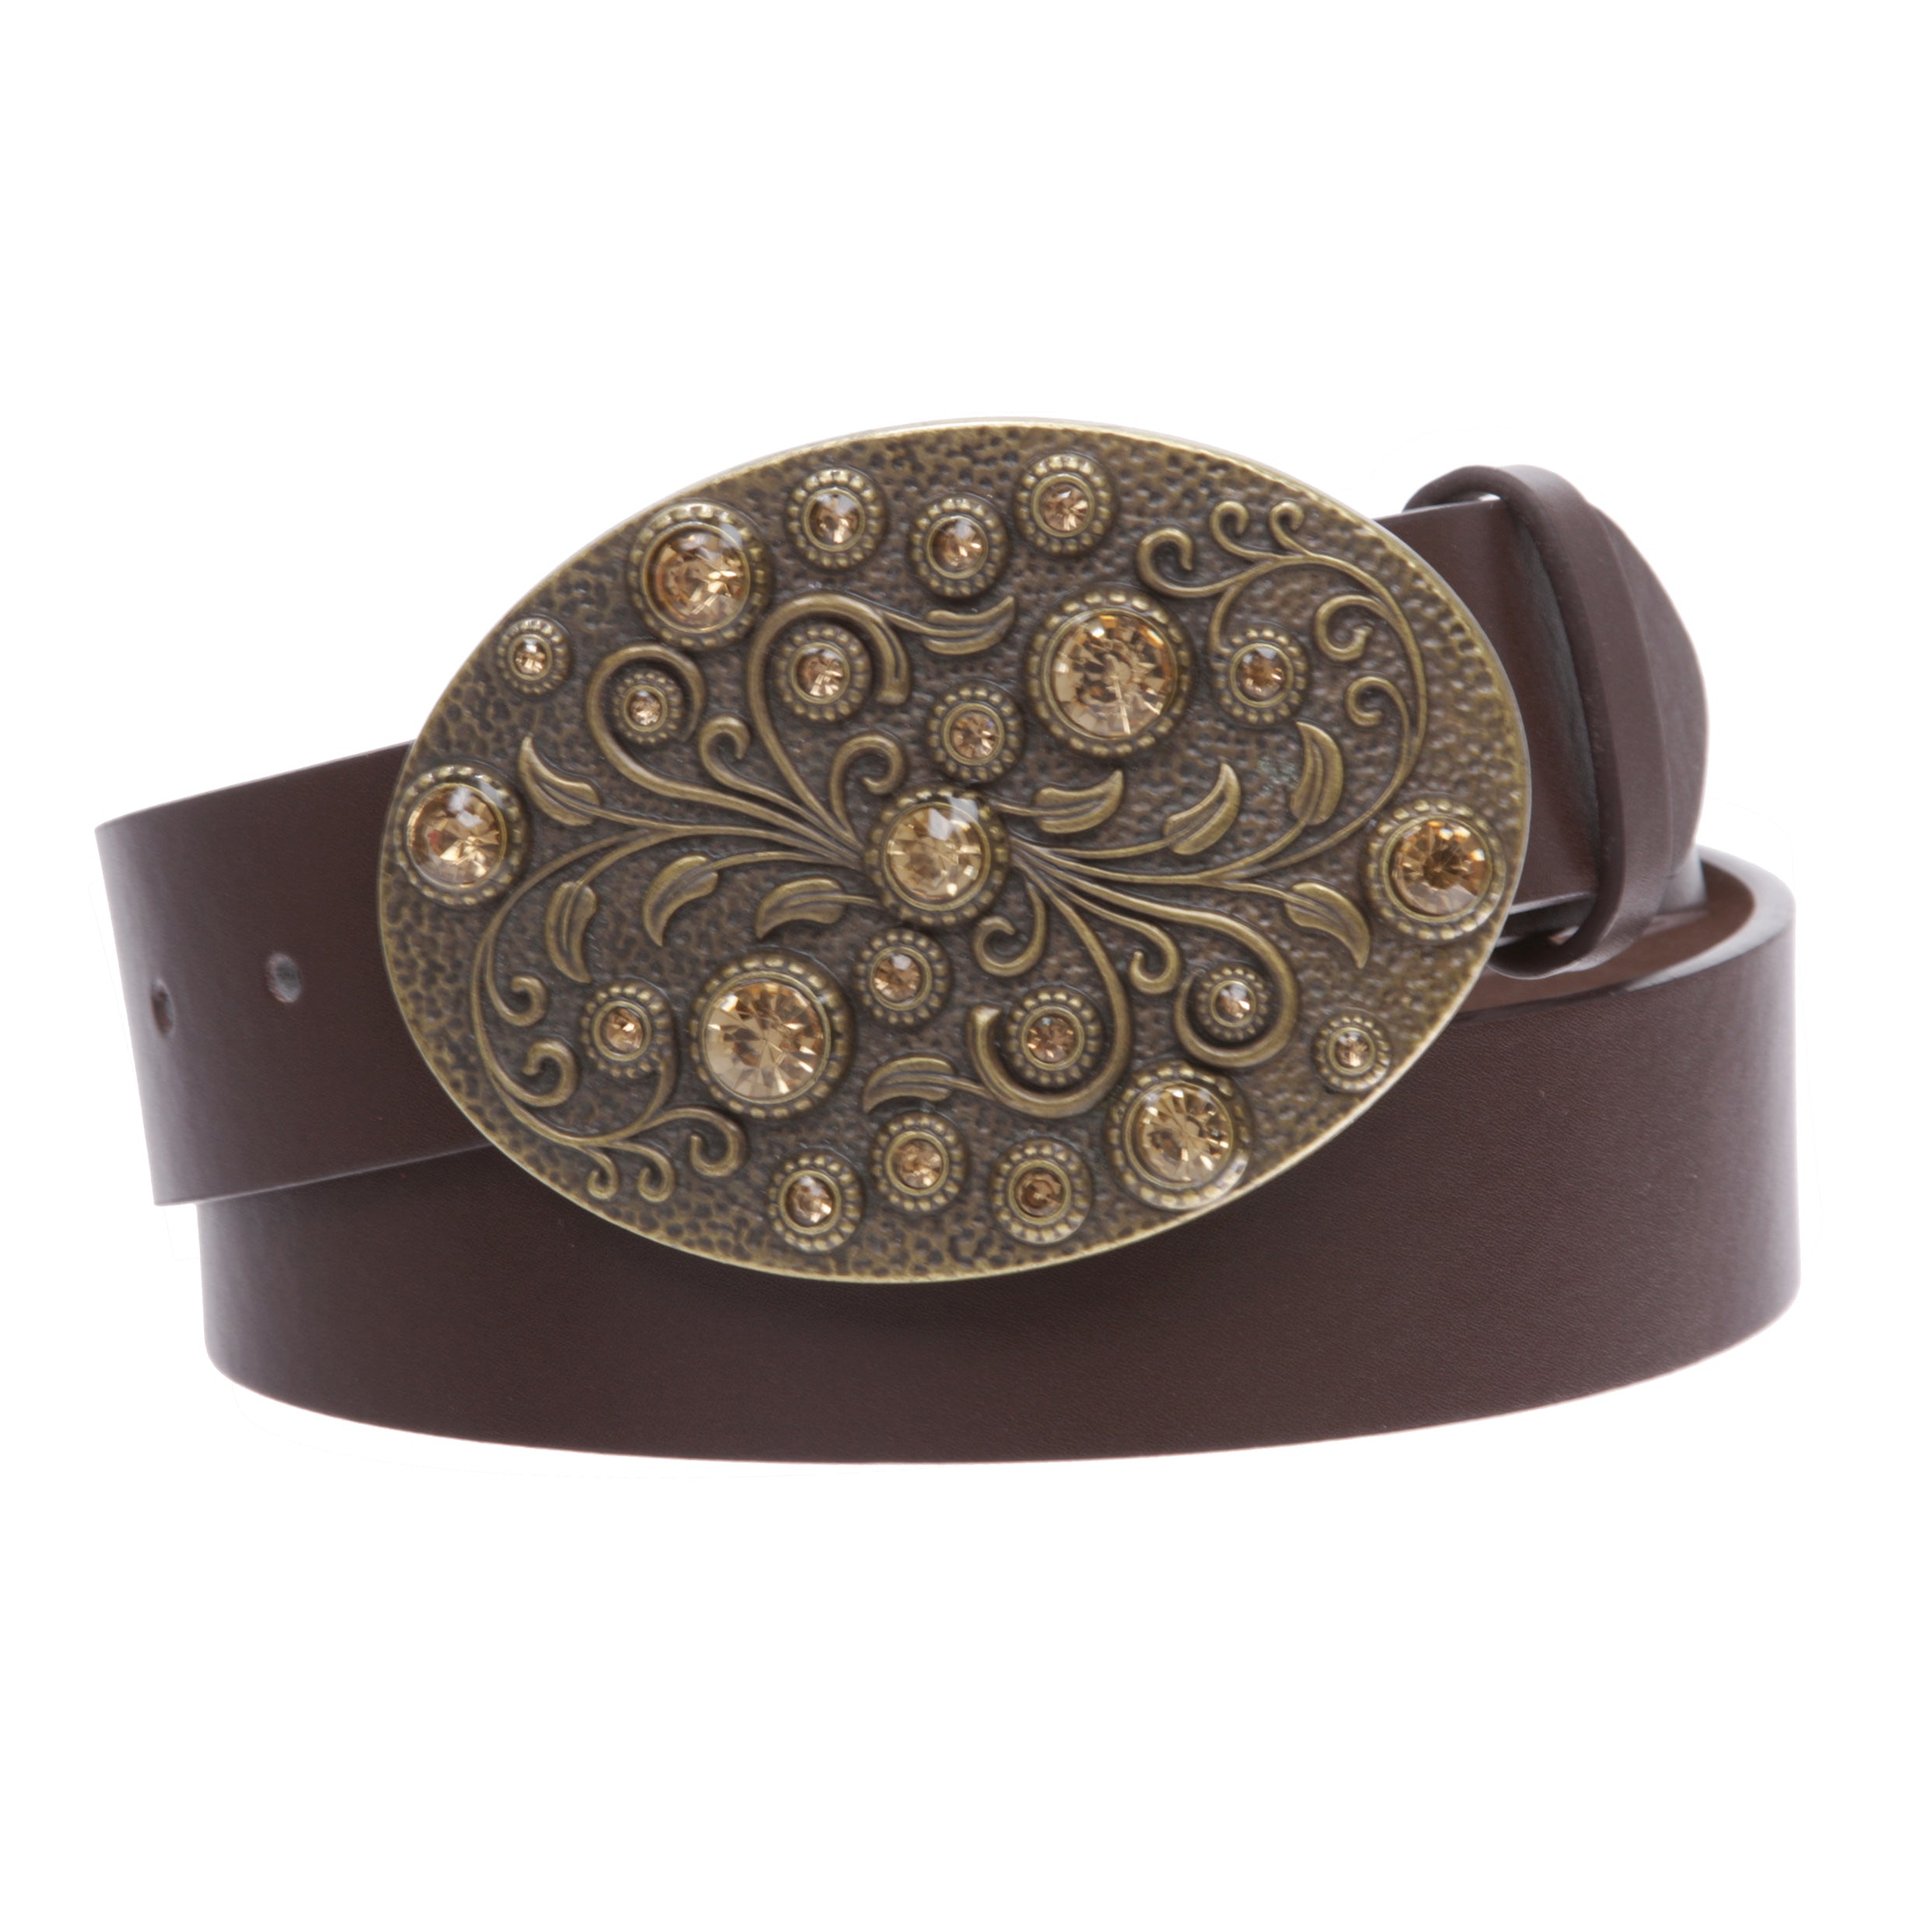 Snap on Bonded Leather Belt with Rhinestone Oval Flower Buckle